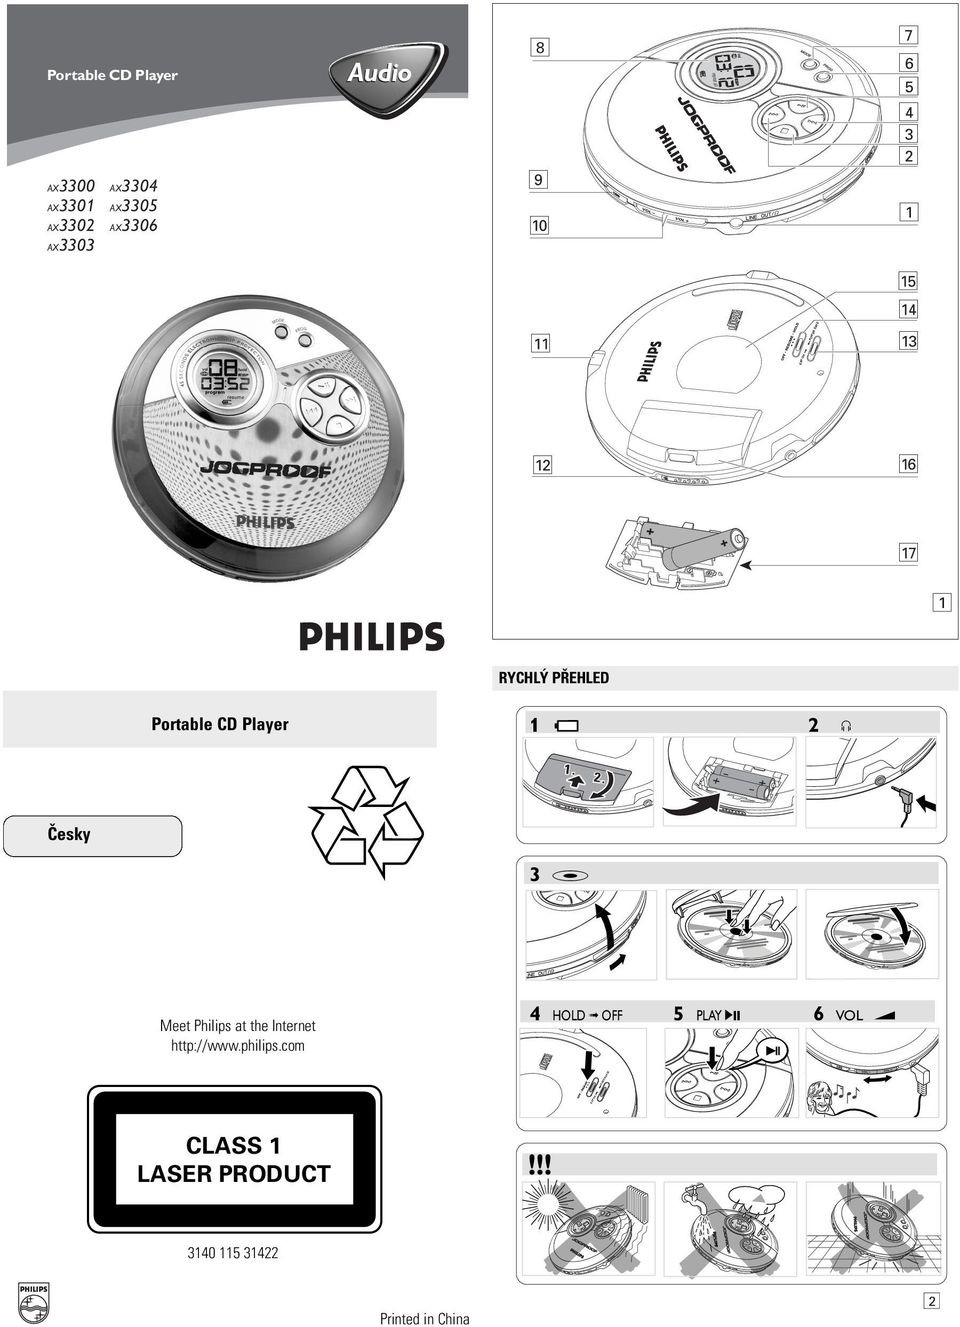 . Èesky 3 # Meet Philips at the Internet http://www.philips.